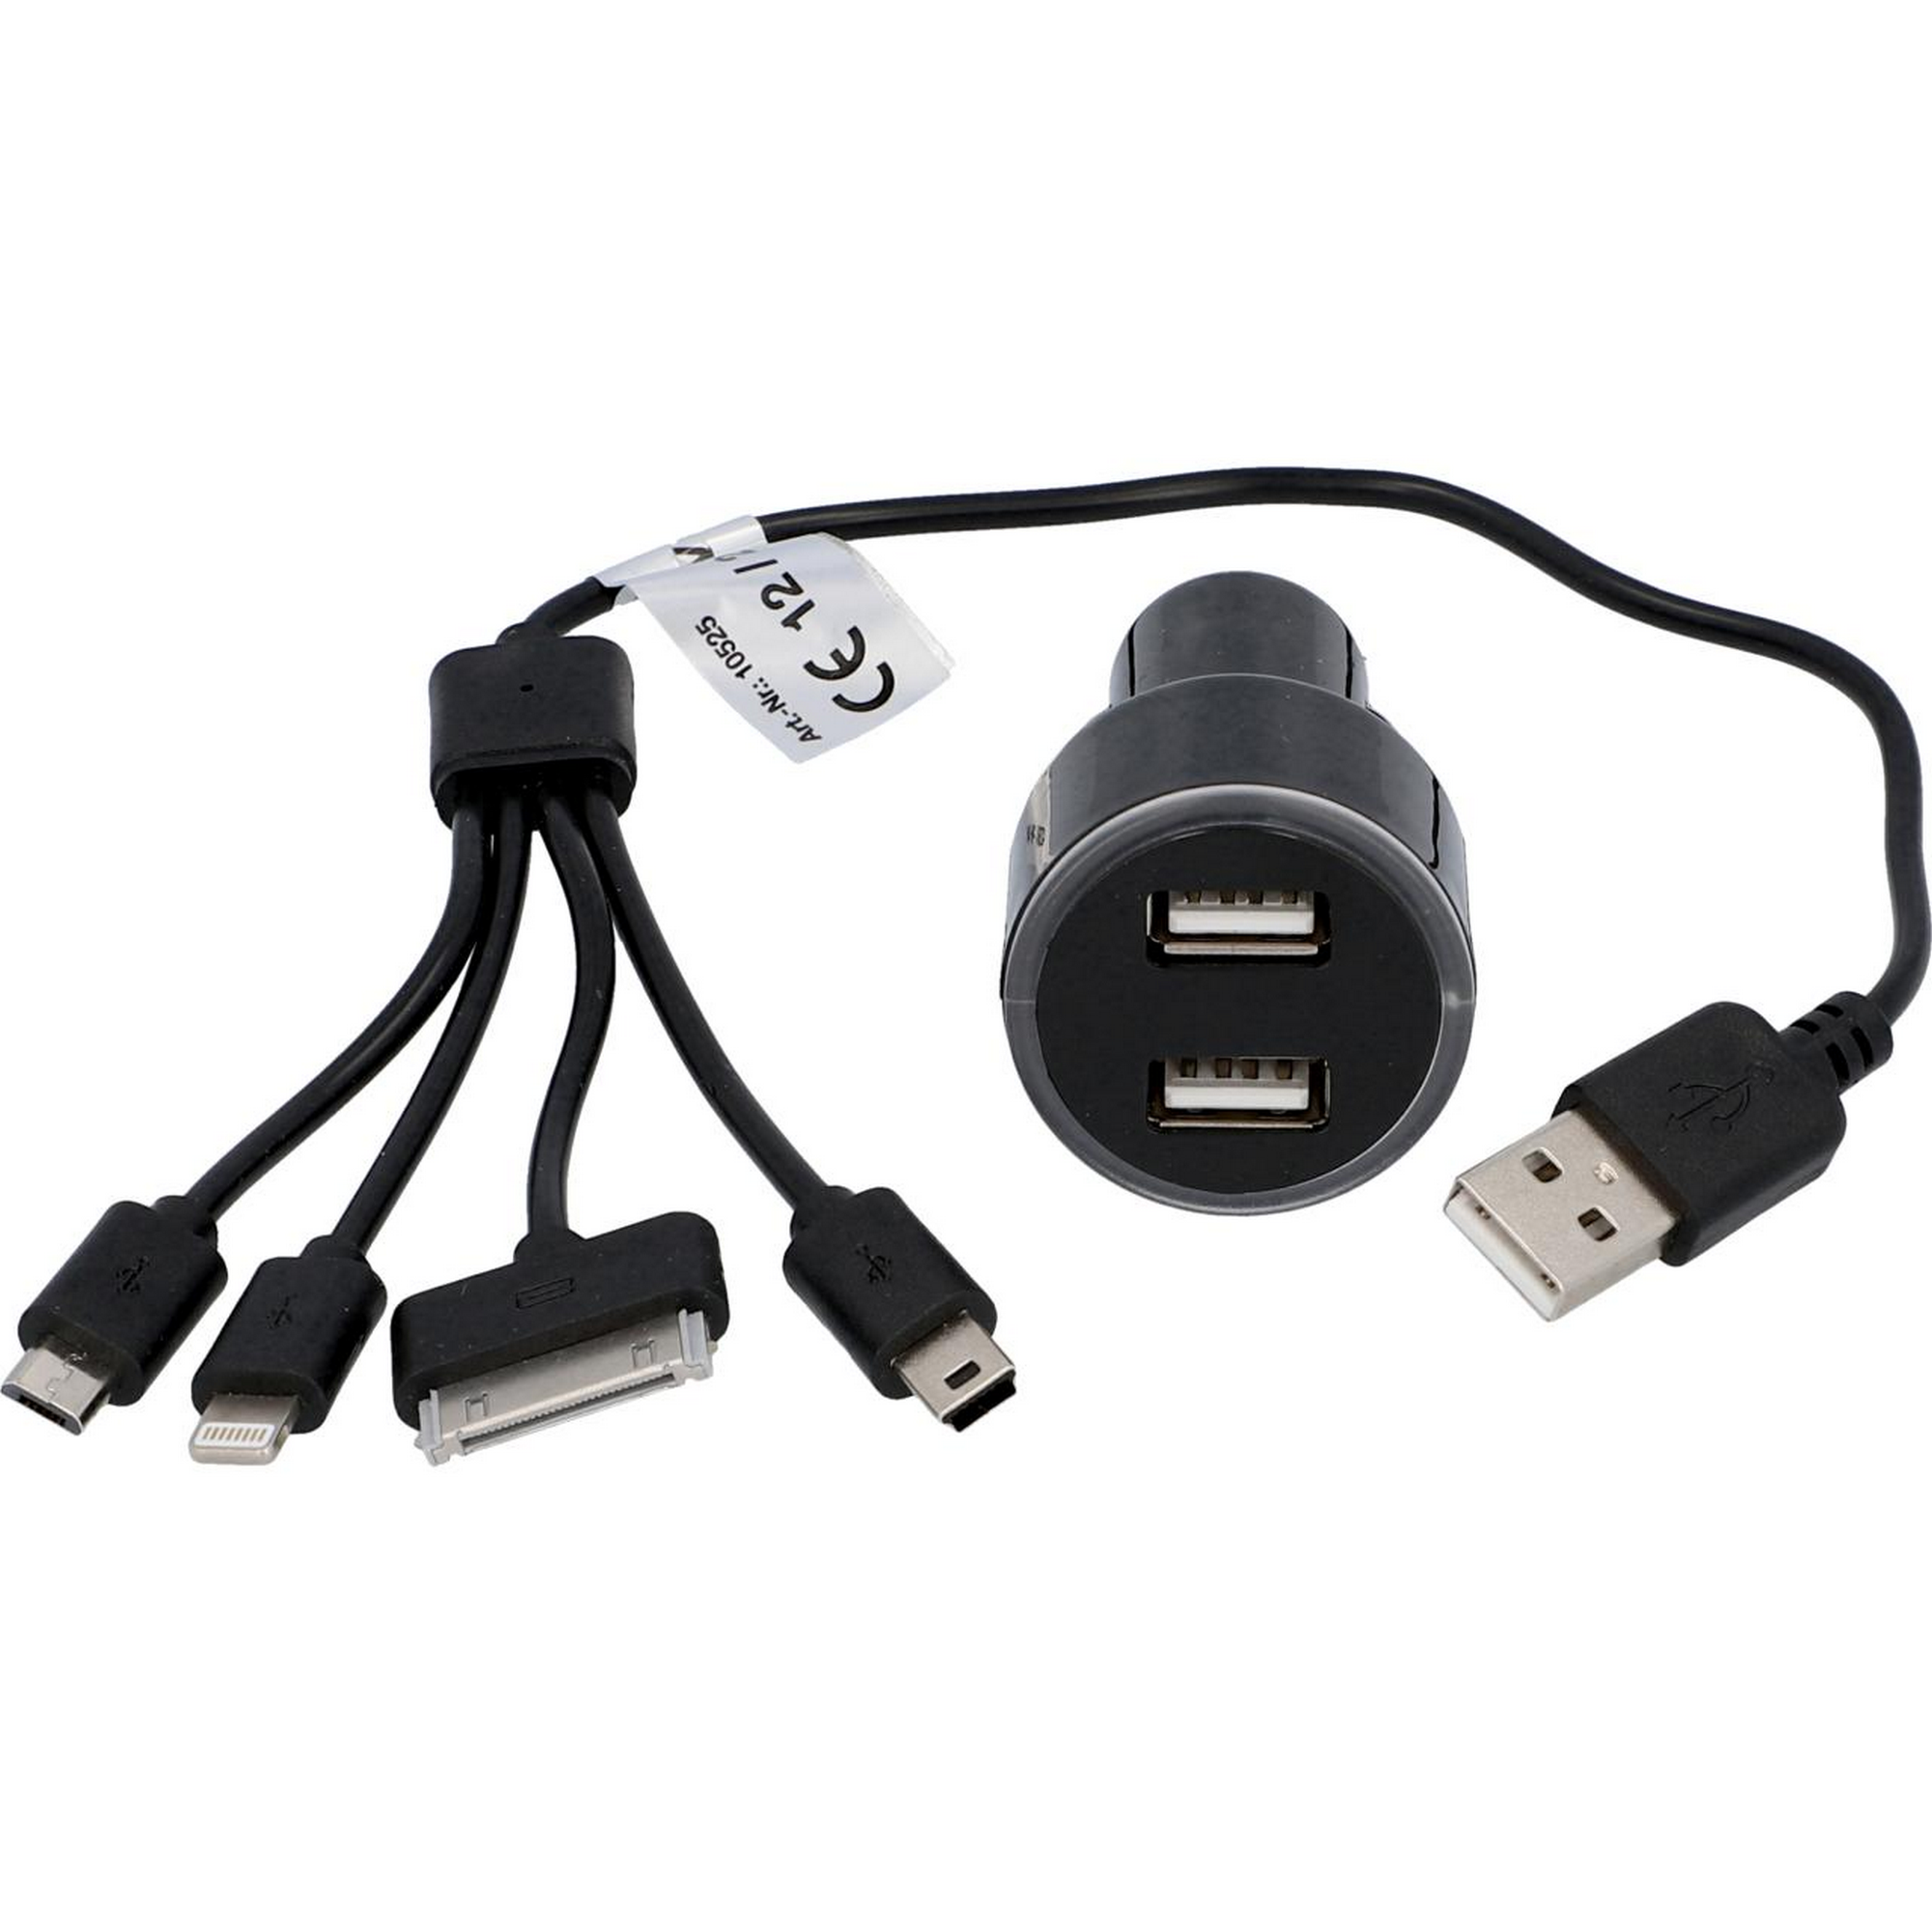 Kfz-USB-Lade-Set 4 in 1 + product picture